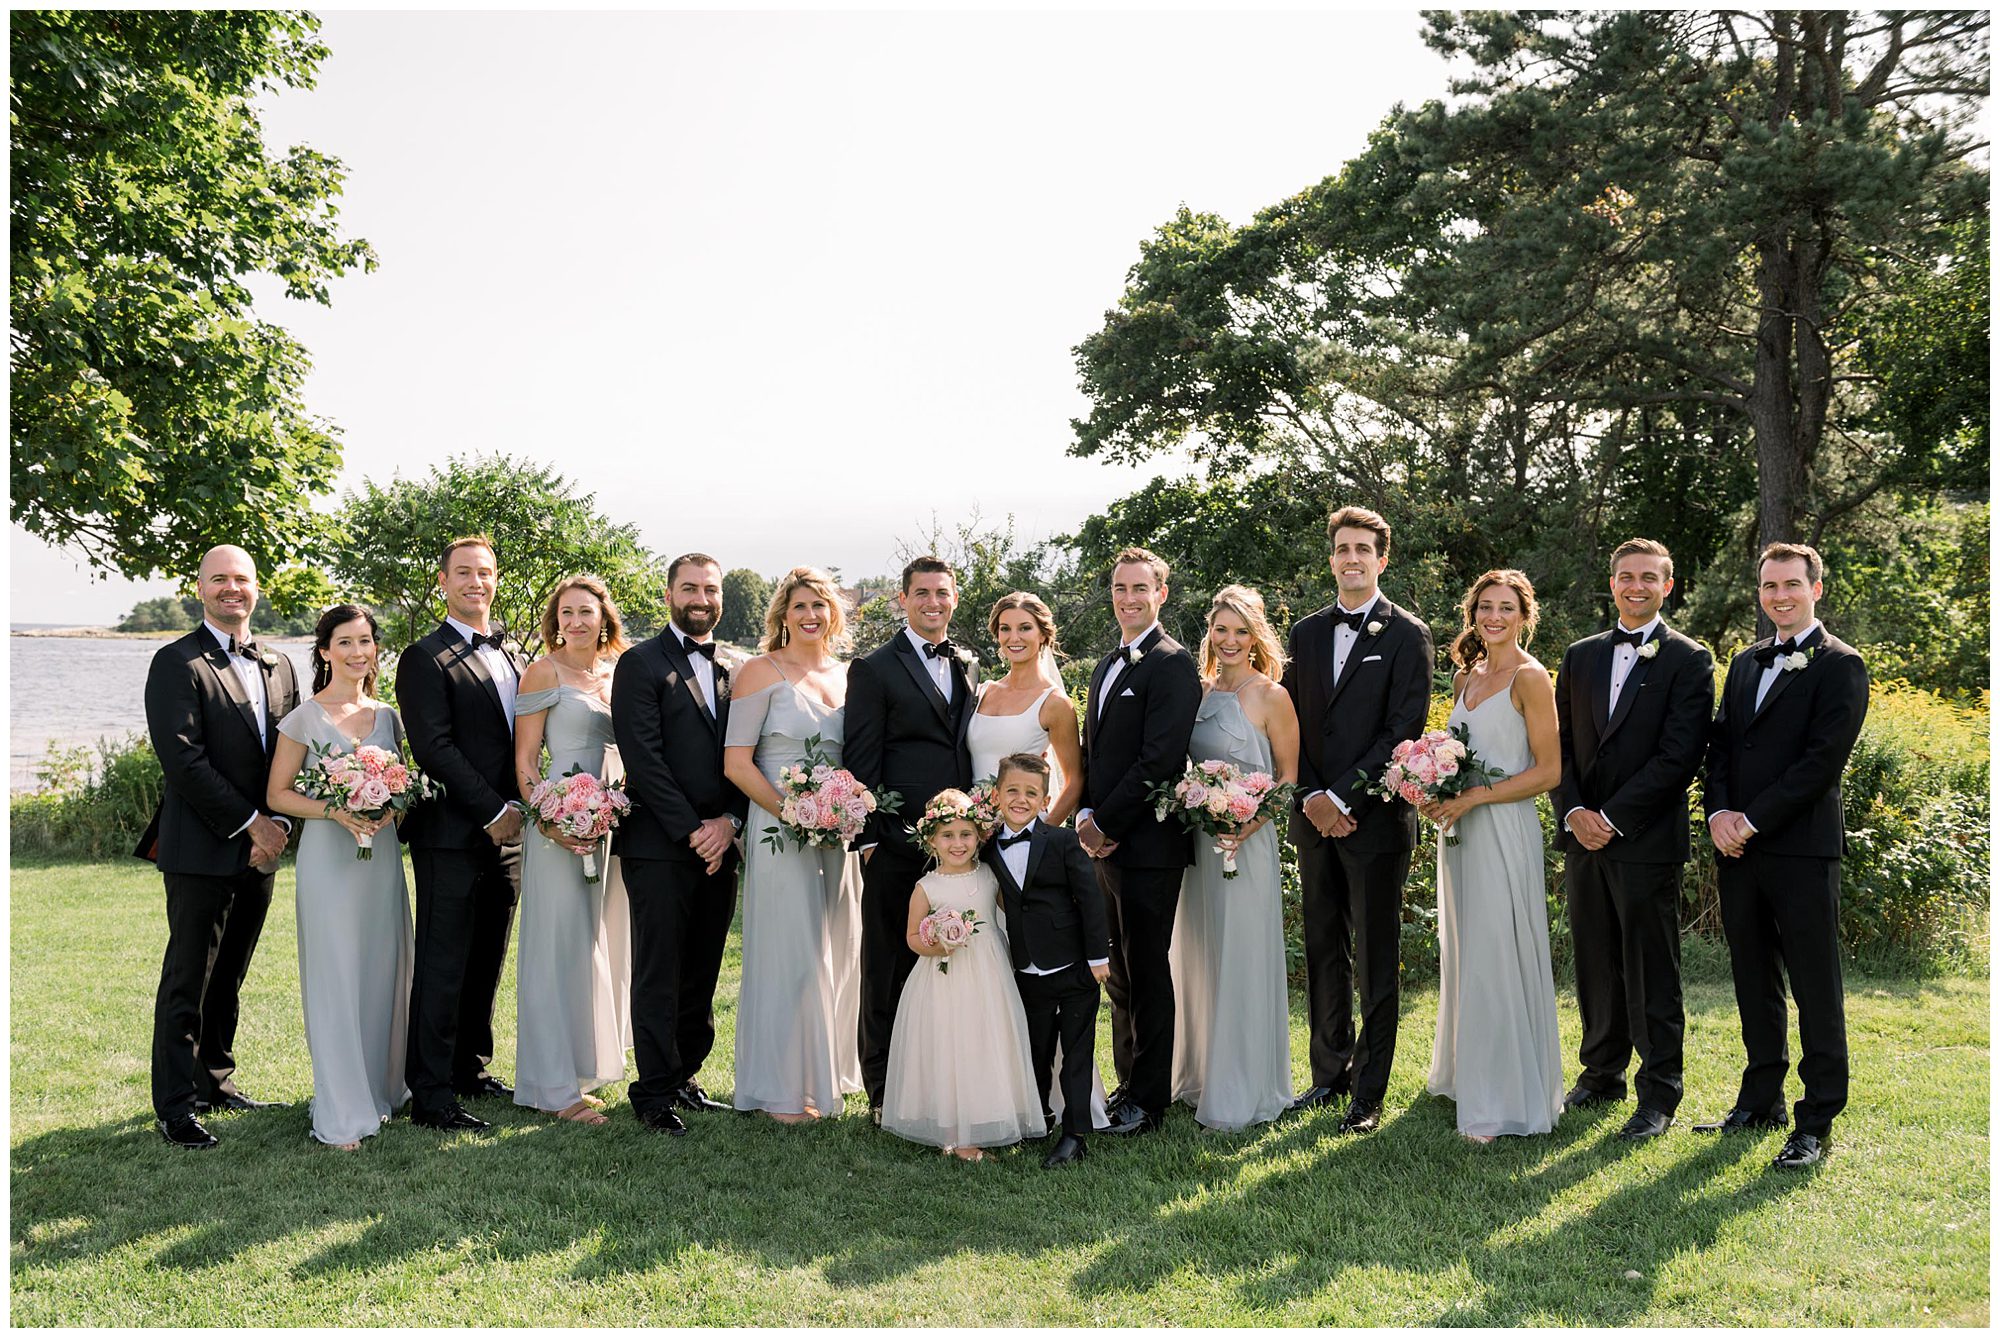 Bridal Party photos at Newcastle Commons in Rye, NH.